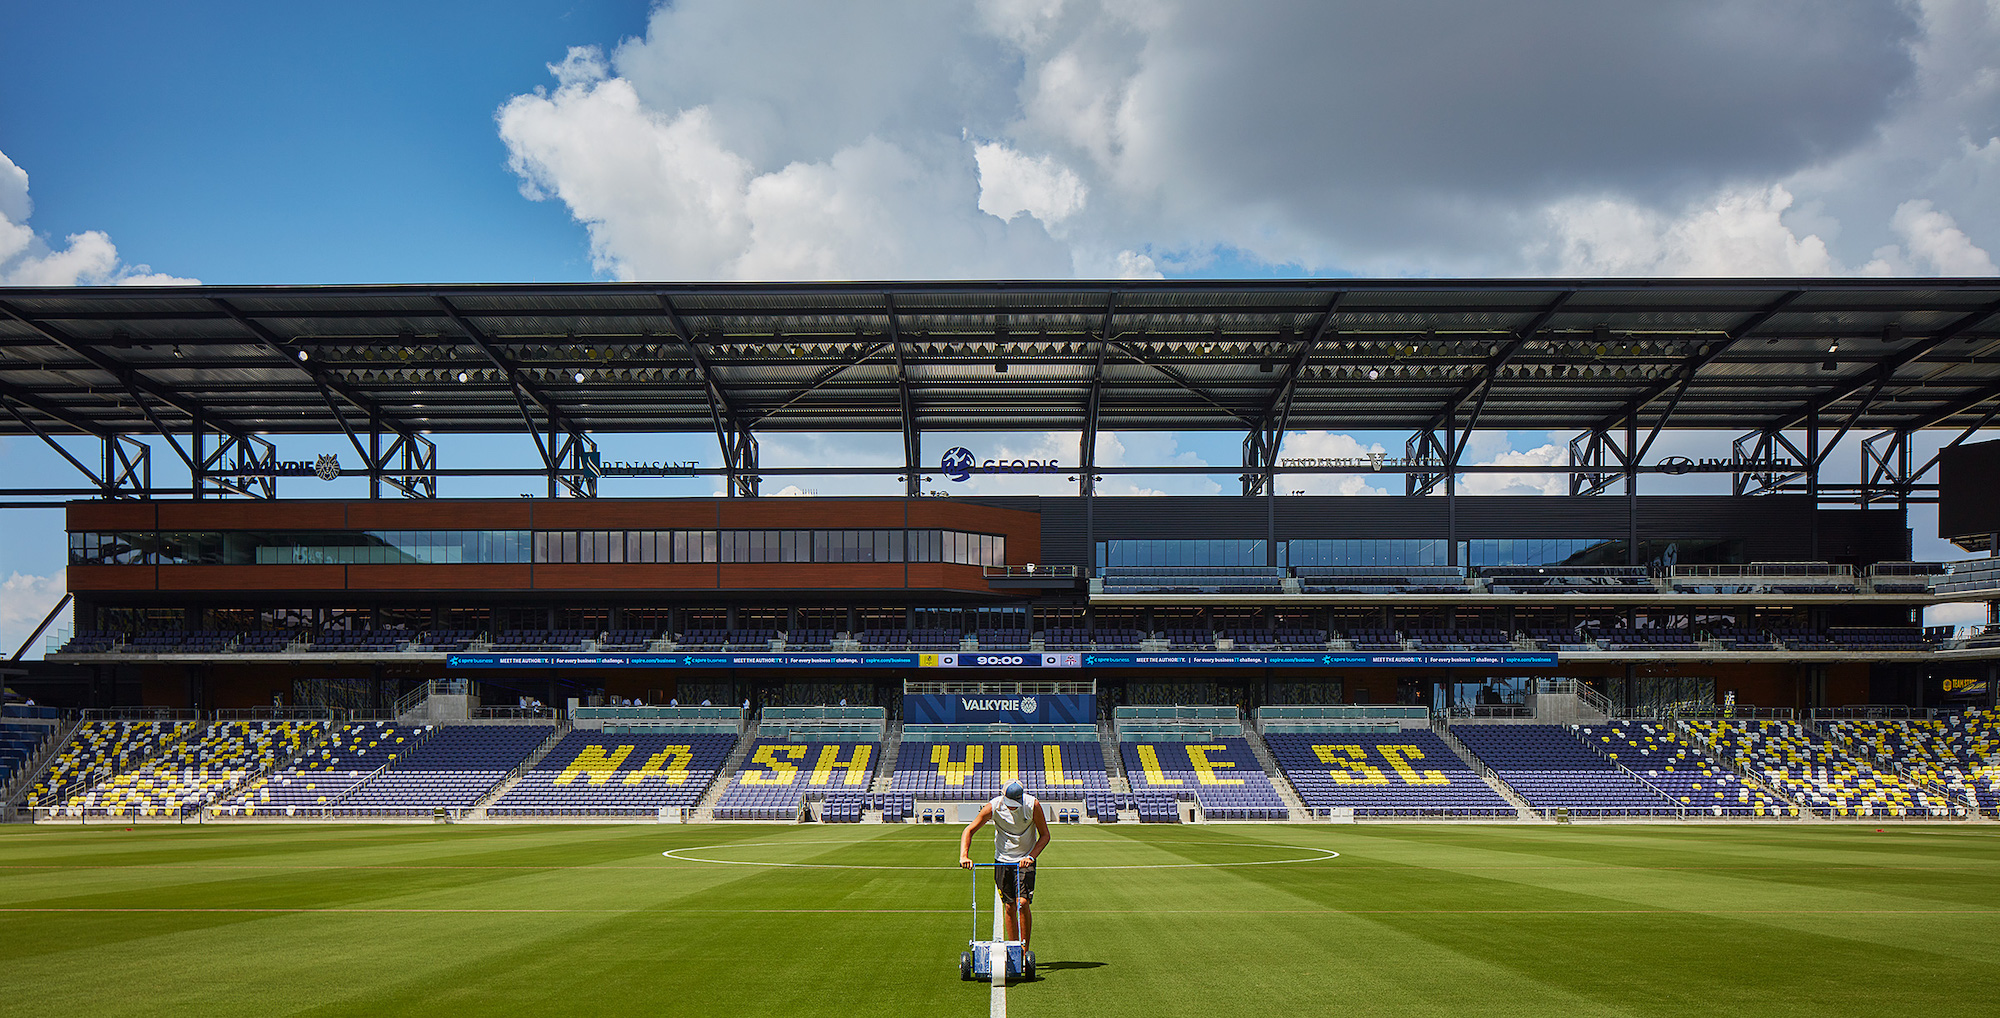 Nashville boasts the largest soccer-specific stadium in the U.S. and Canada - GEODIS Park Photo: Tom Harris